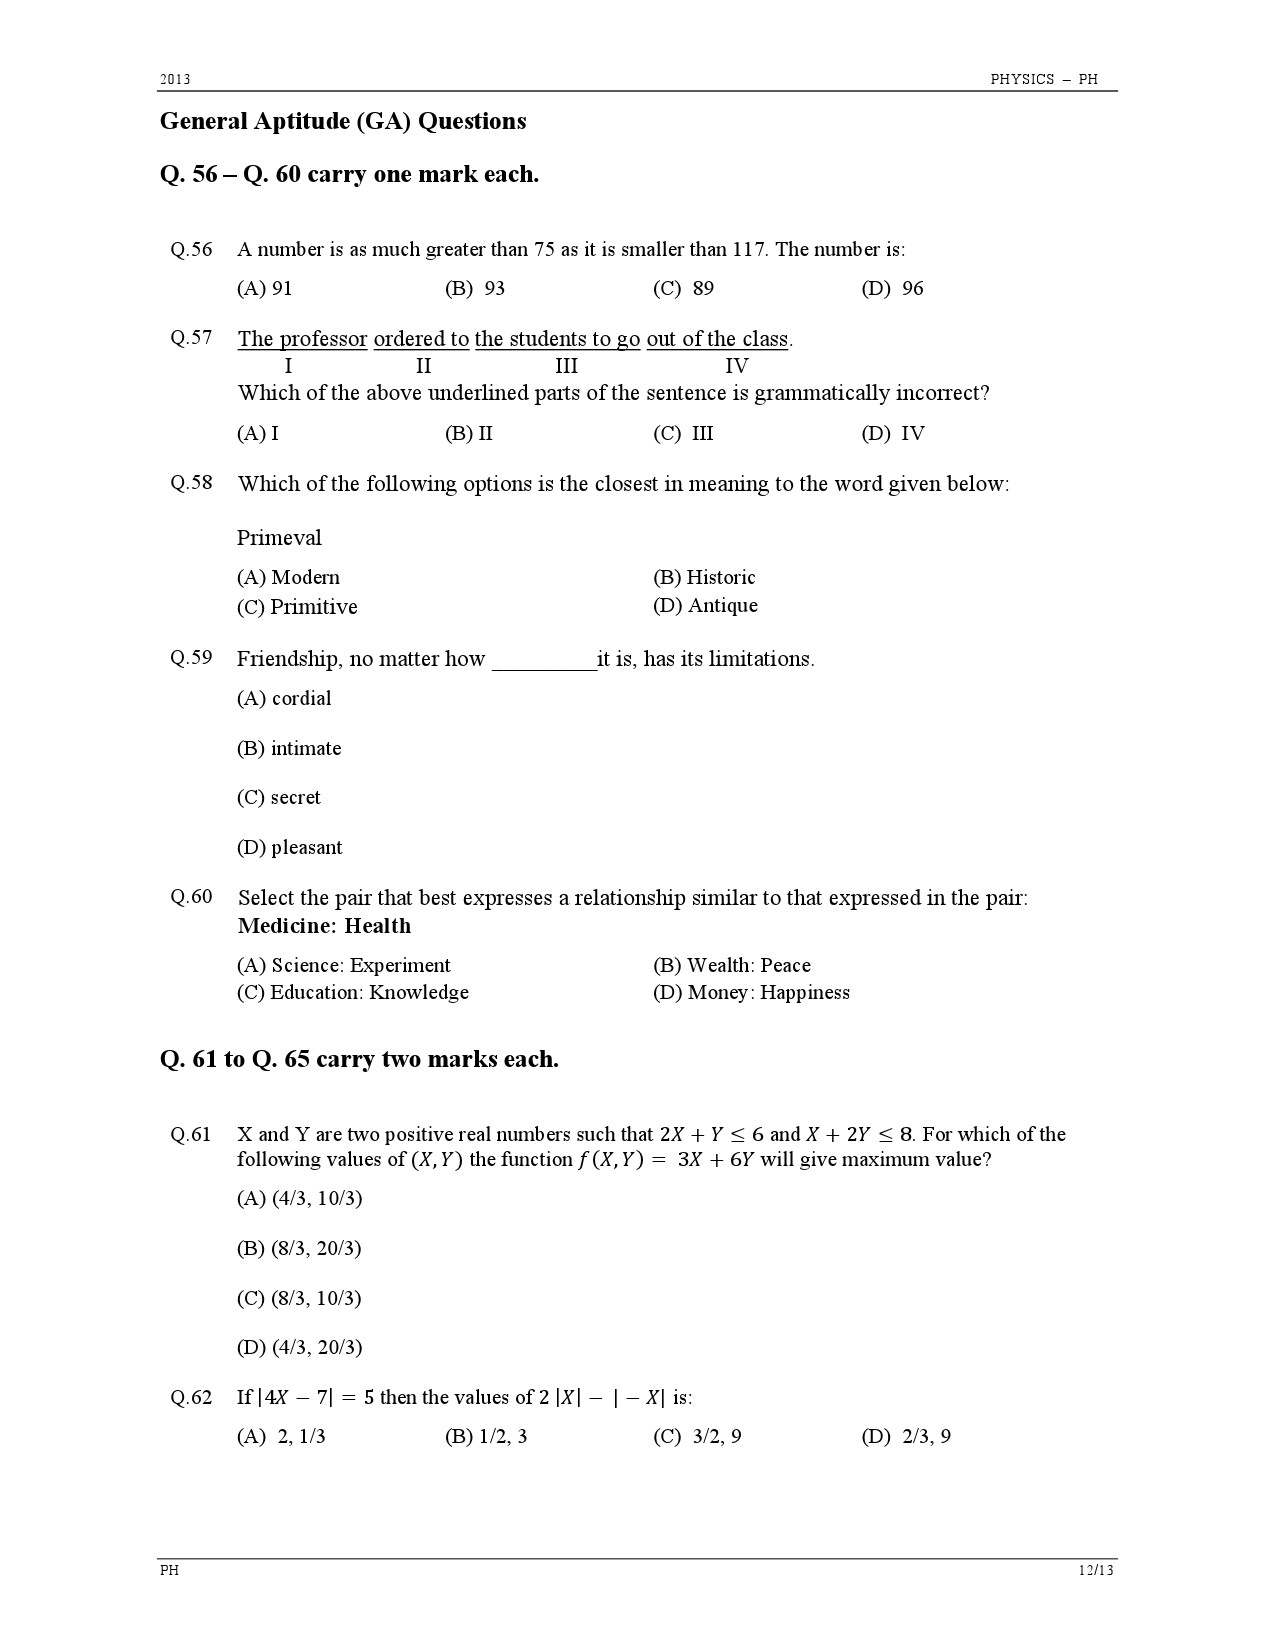 GATE Exam Question Paper 2013 Physics 12